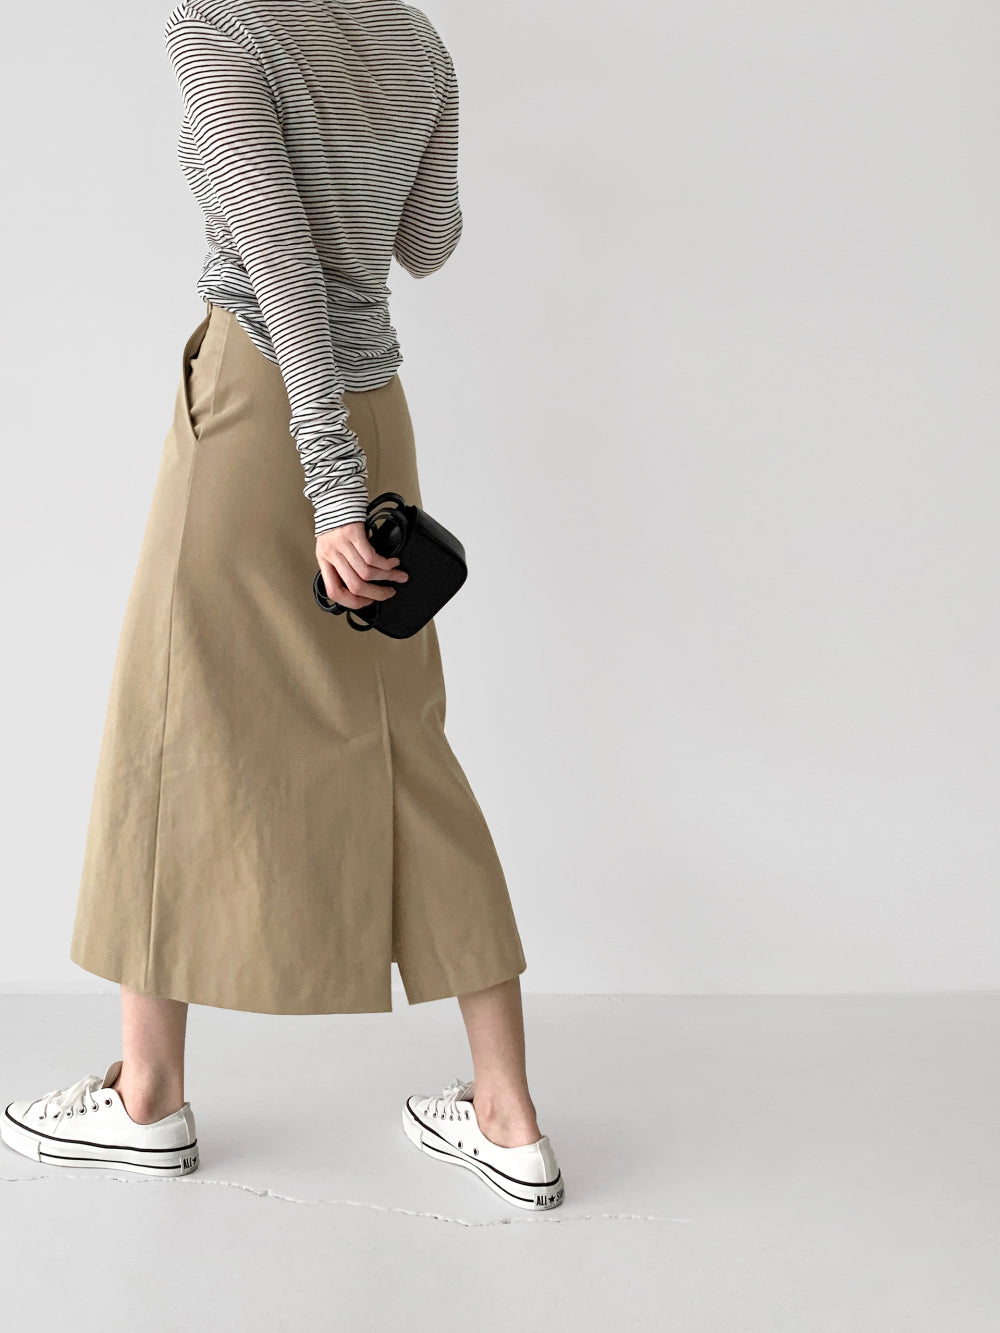 March Skirt (PREORDER)